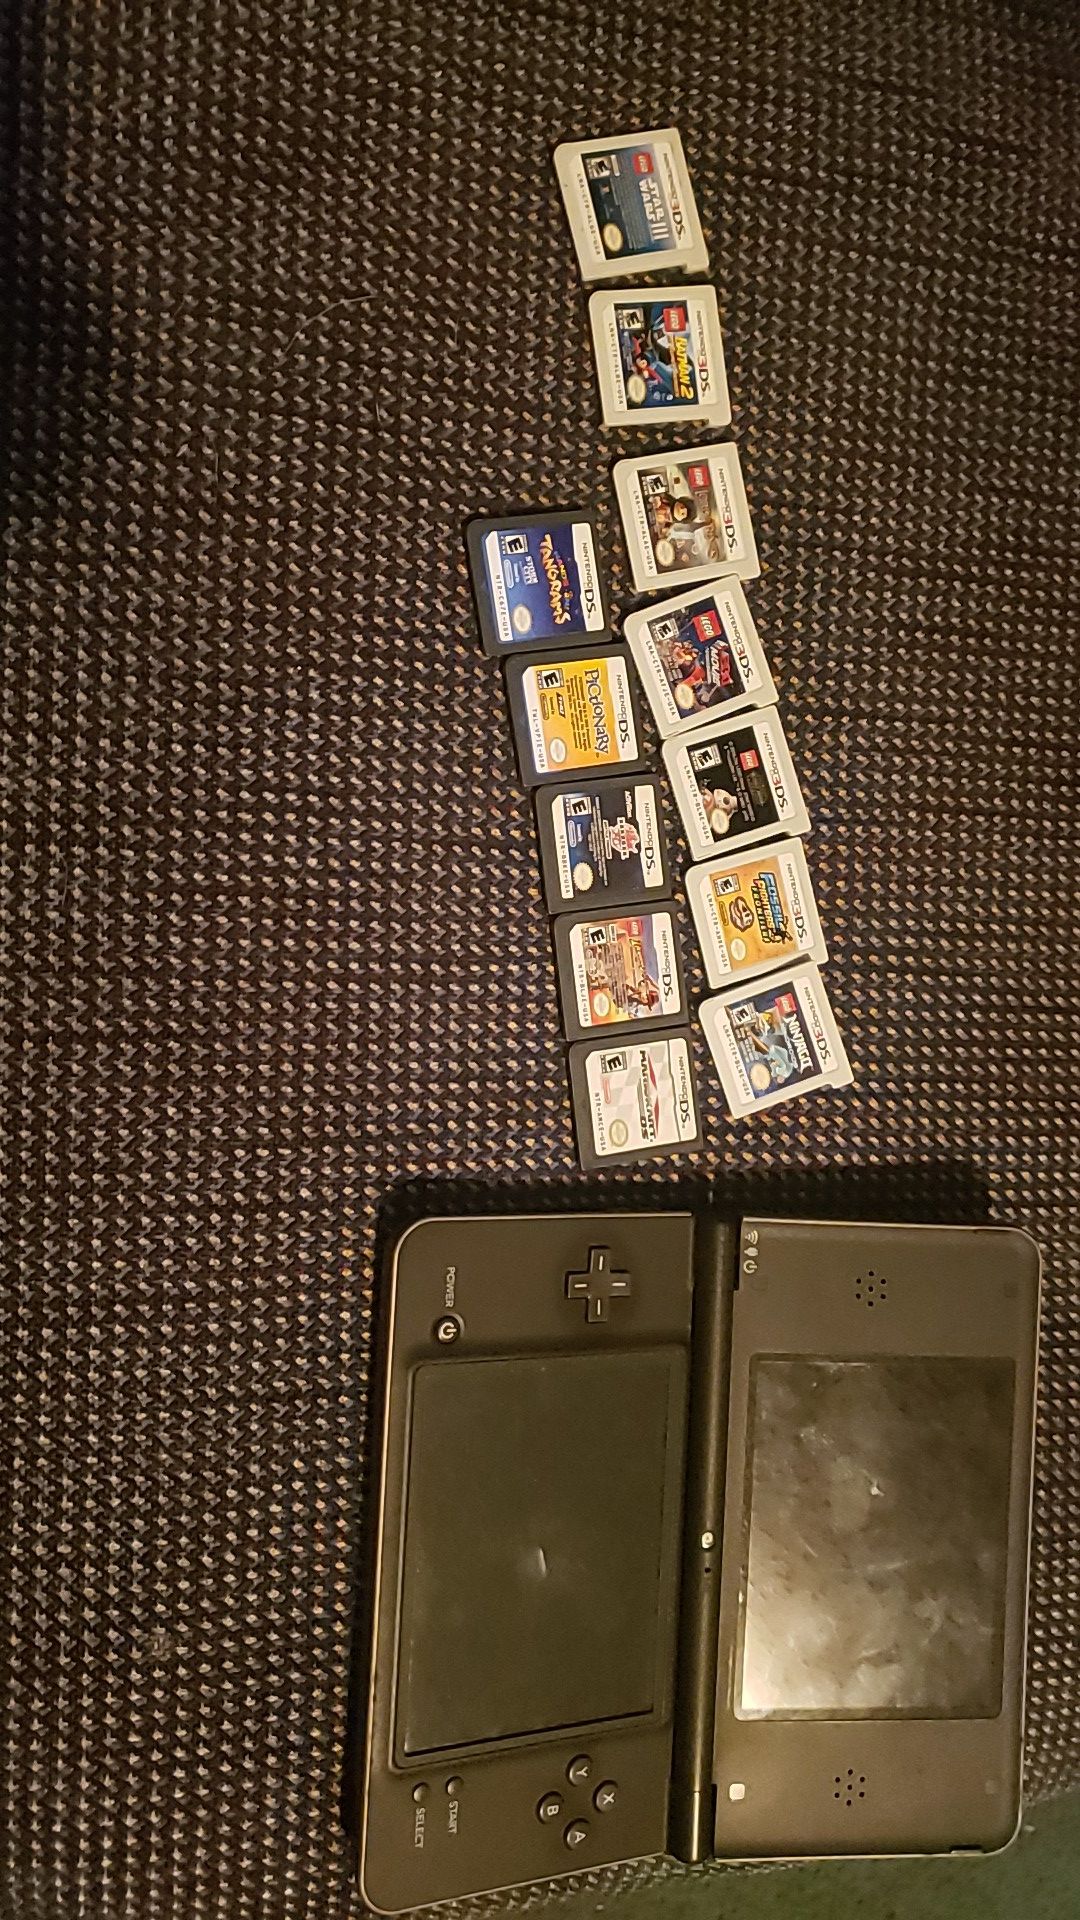 Nintendo ds with 11 games "3ds games and D's games" with case